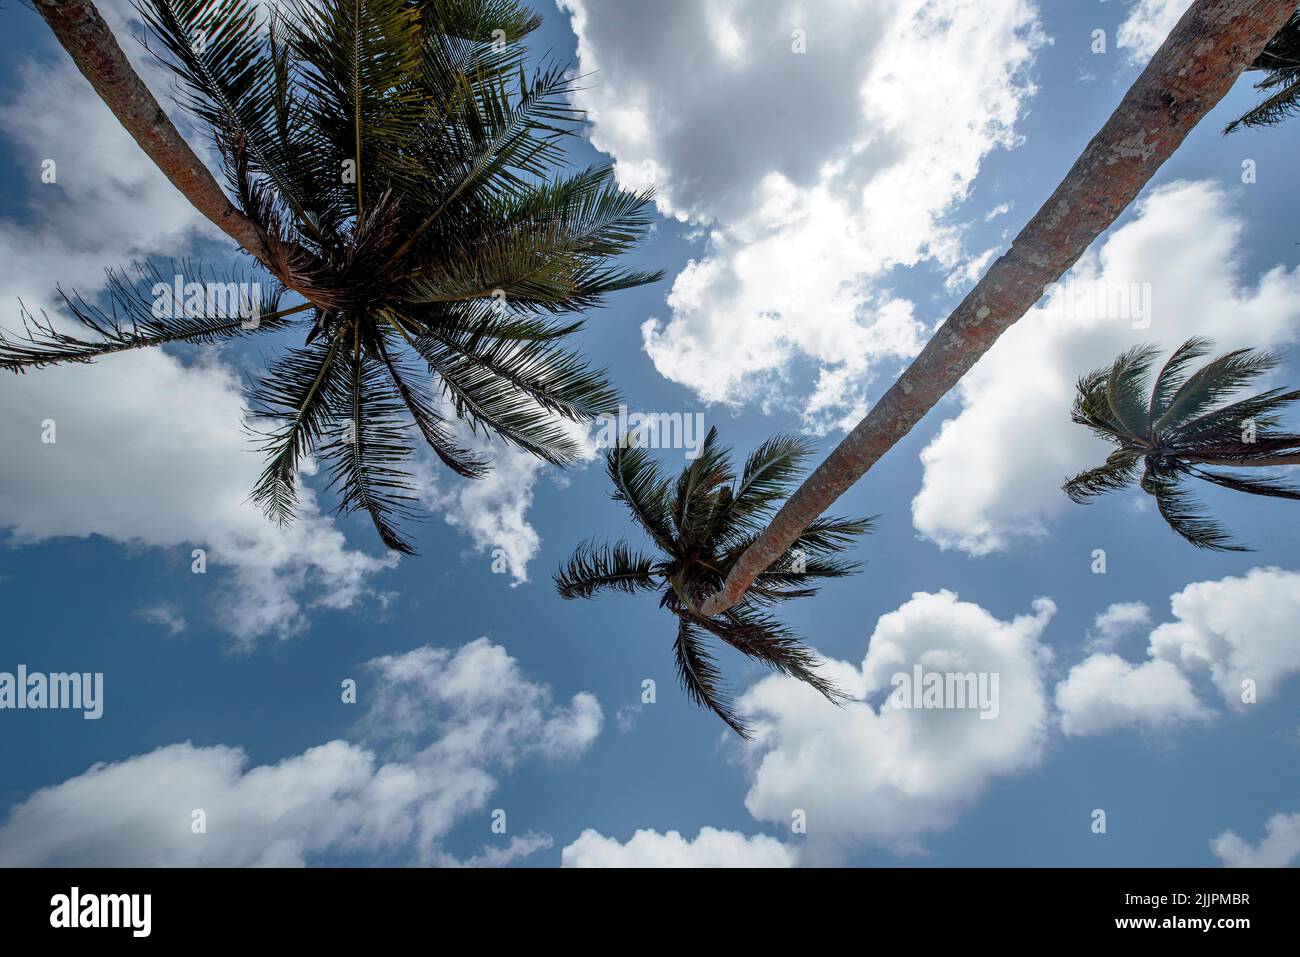 Low angle view of palm trees against a partly cloudy sky, Indonesia Stock Photo